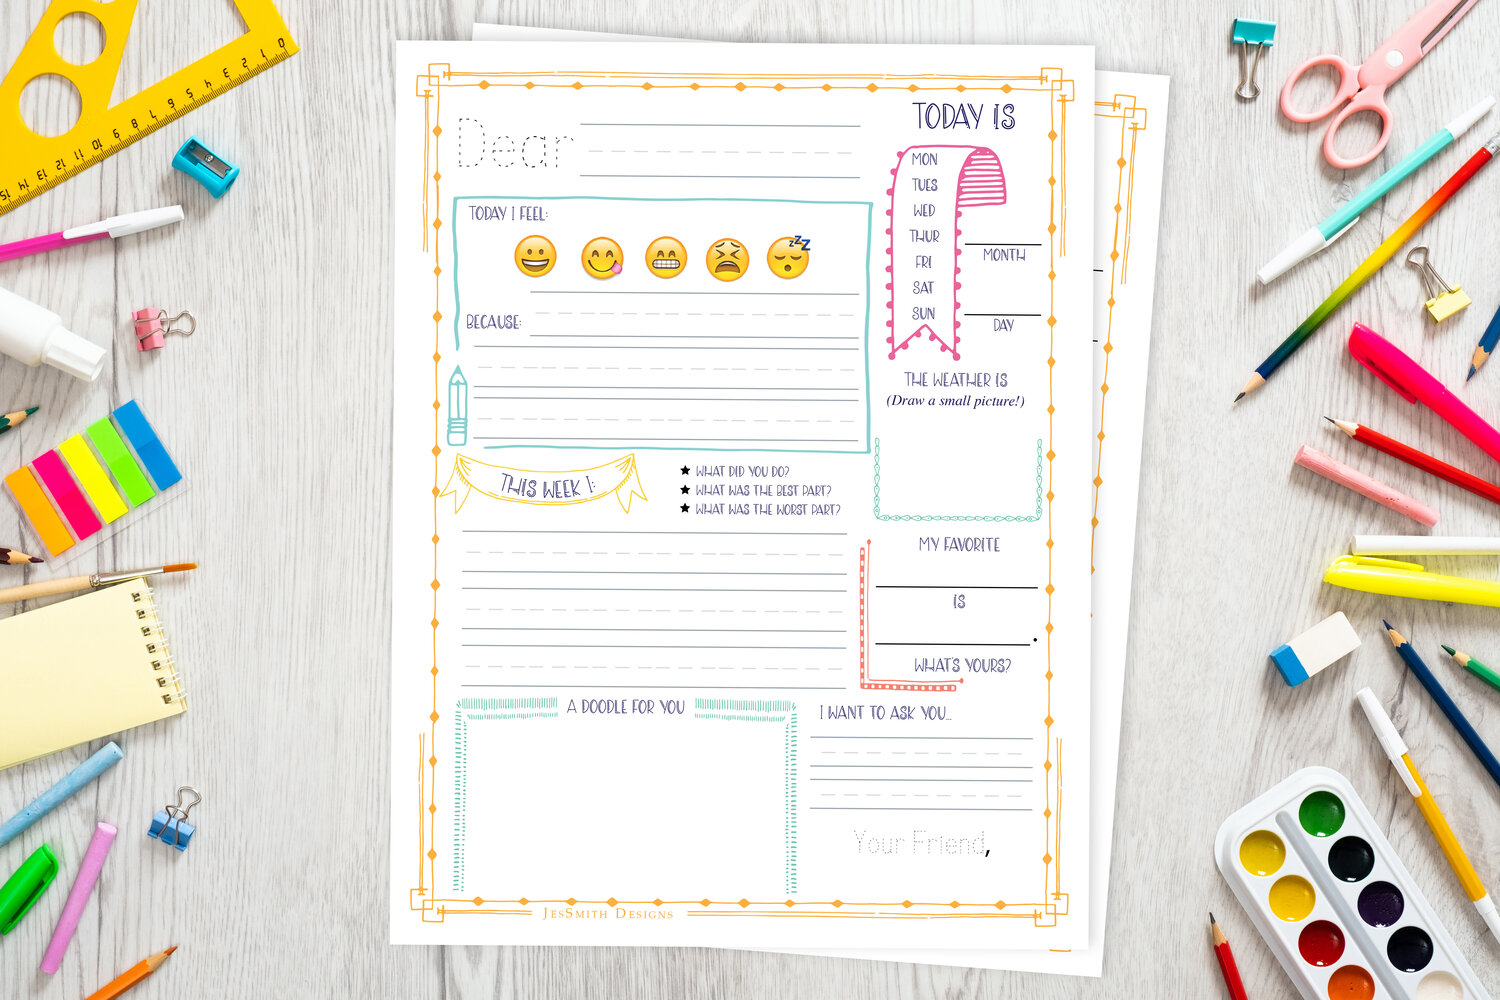 Write On! A letter guide template for pen friends — JesSmith Designs Pertaining To Pen Pal Letter Template